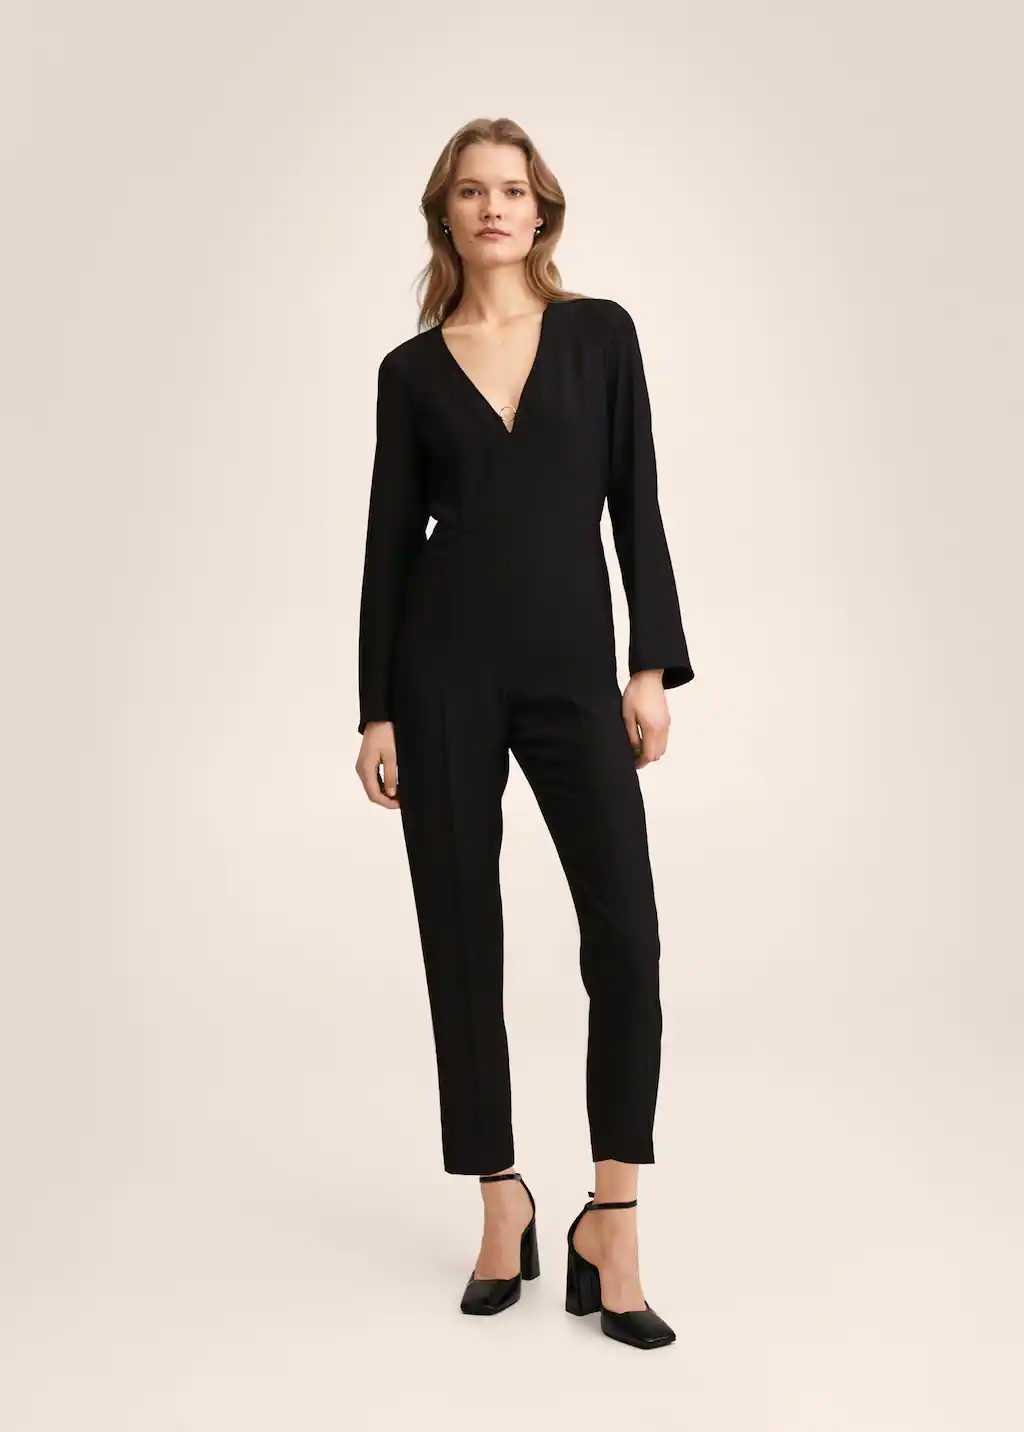 Full length black fluid jumpsuit with long sleeves and v neck featuring metal ring detail. Zip closure and two side pockets. 